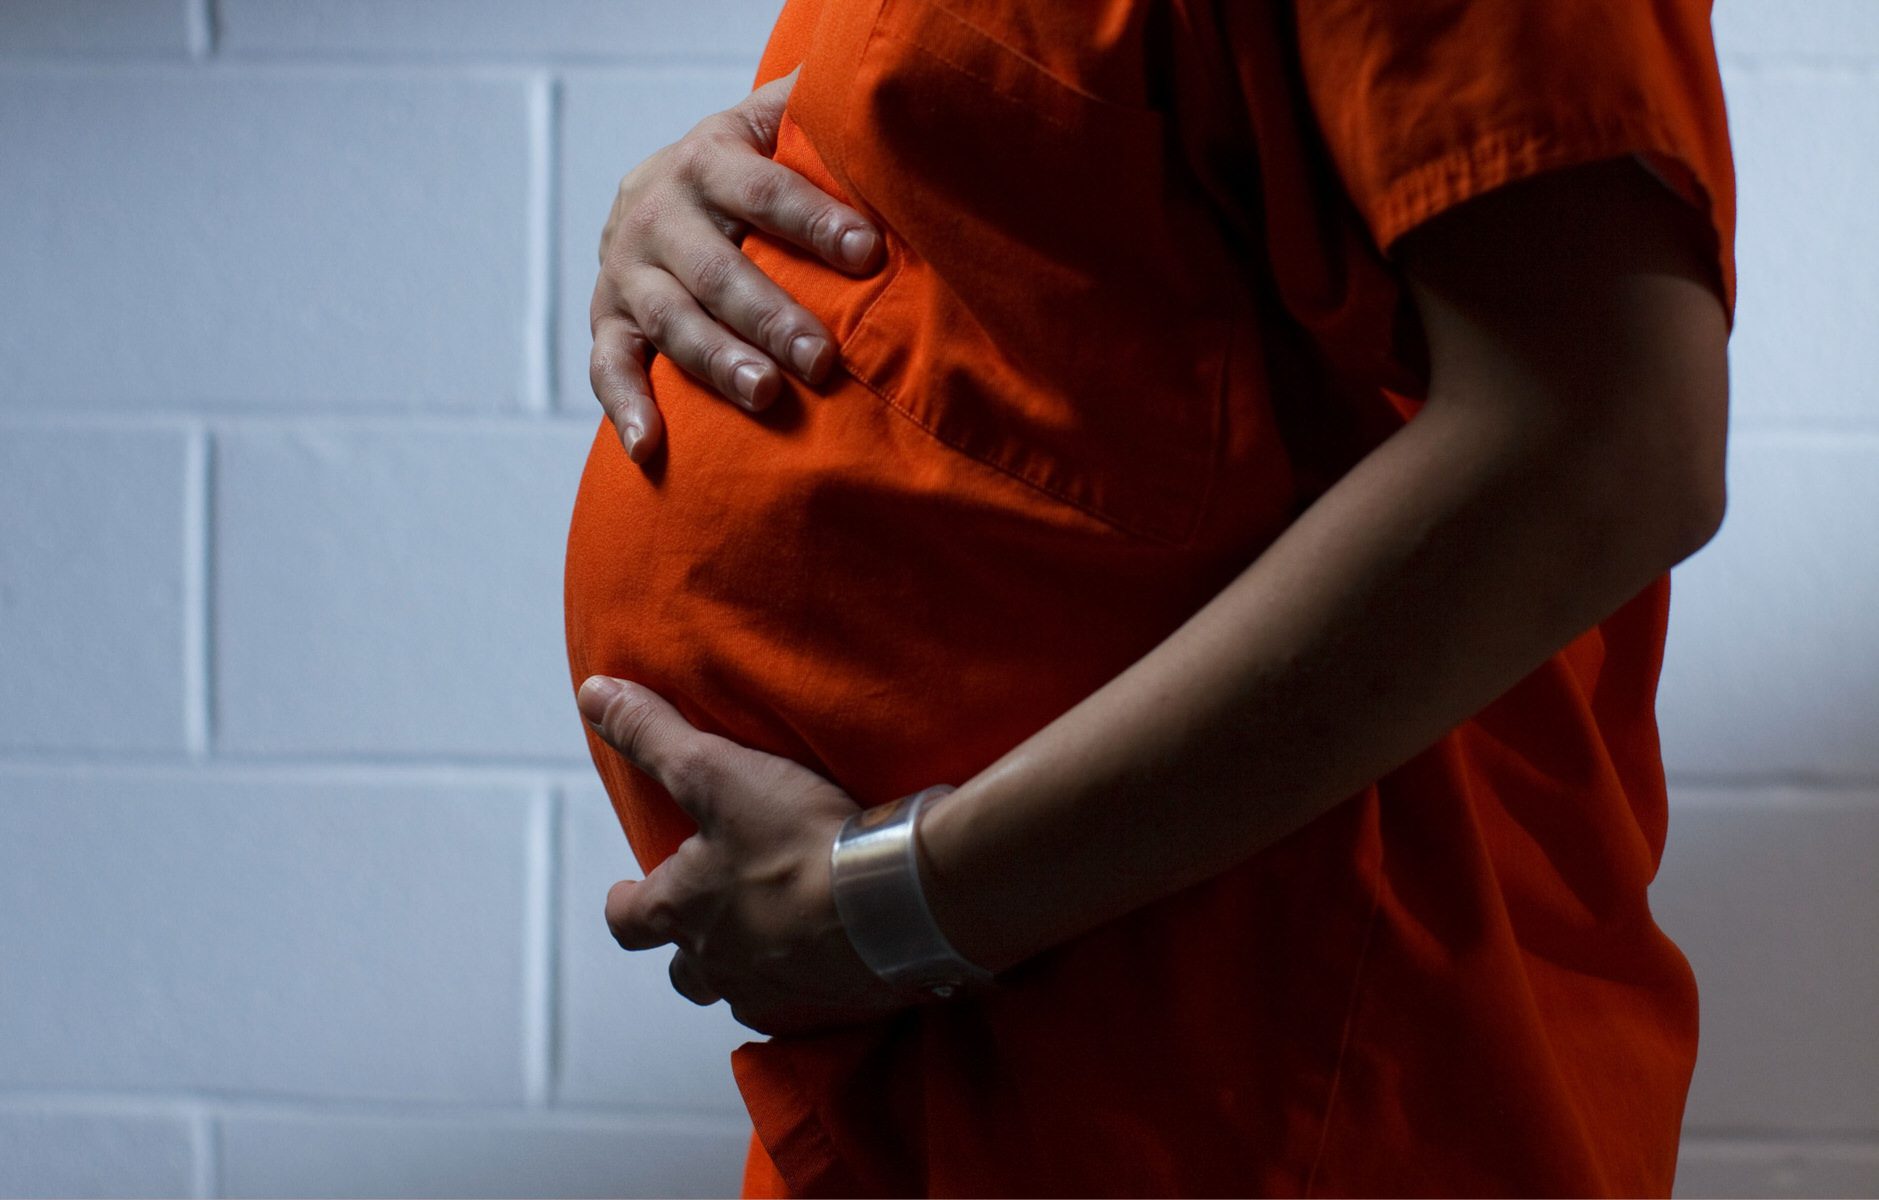 Bill aims to improve care of pregnant women, babies in federal prisons image